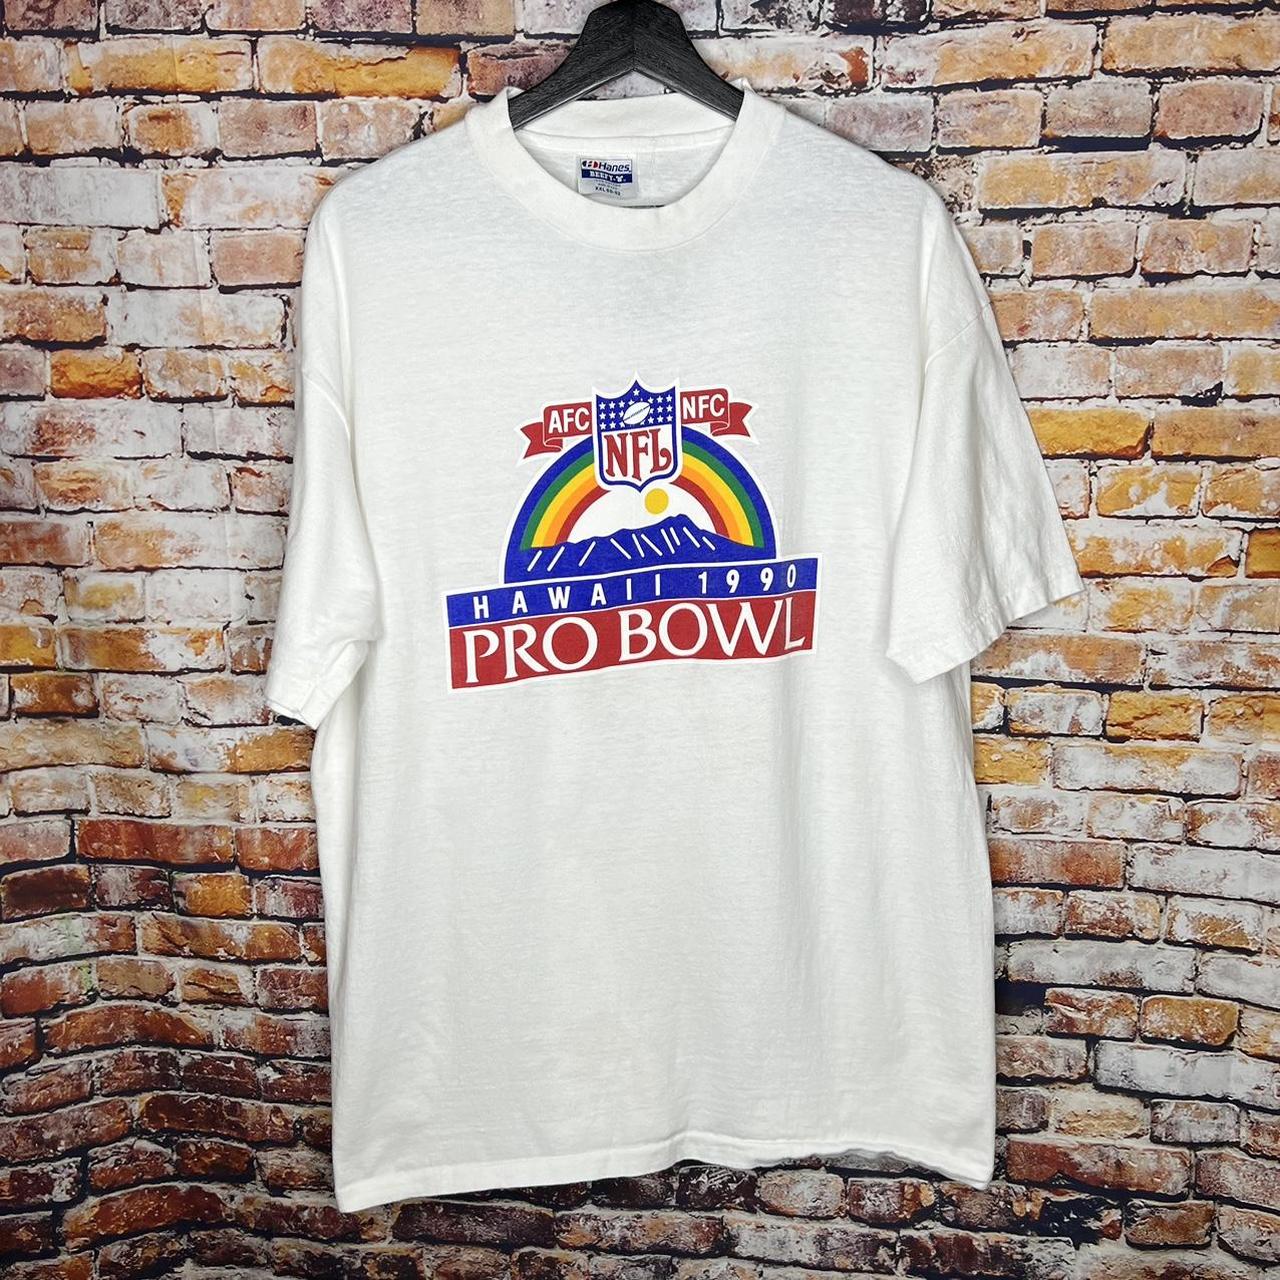 Buy NFL PRO BOWL HAWAII 1983 OVERSIZED T-SHIRT for EUR 38.90 on